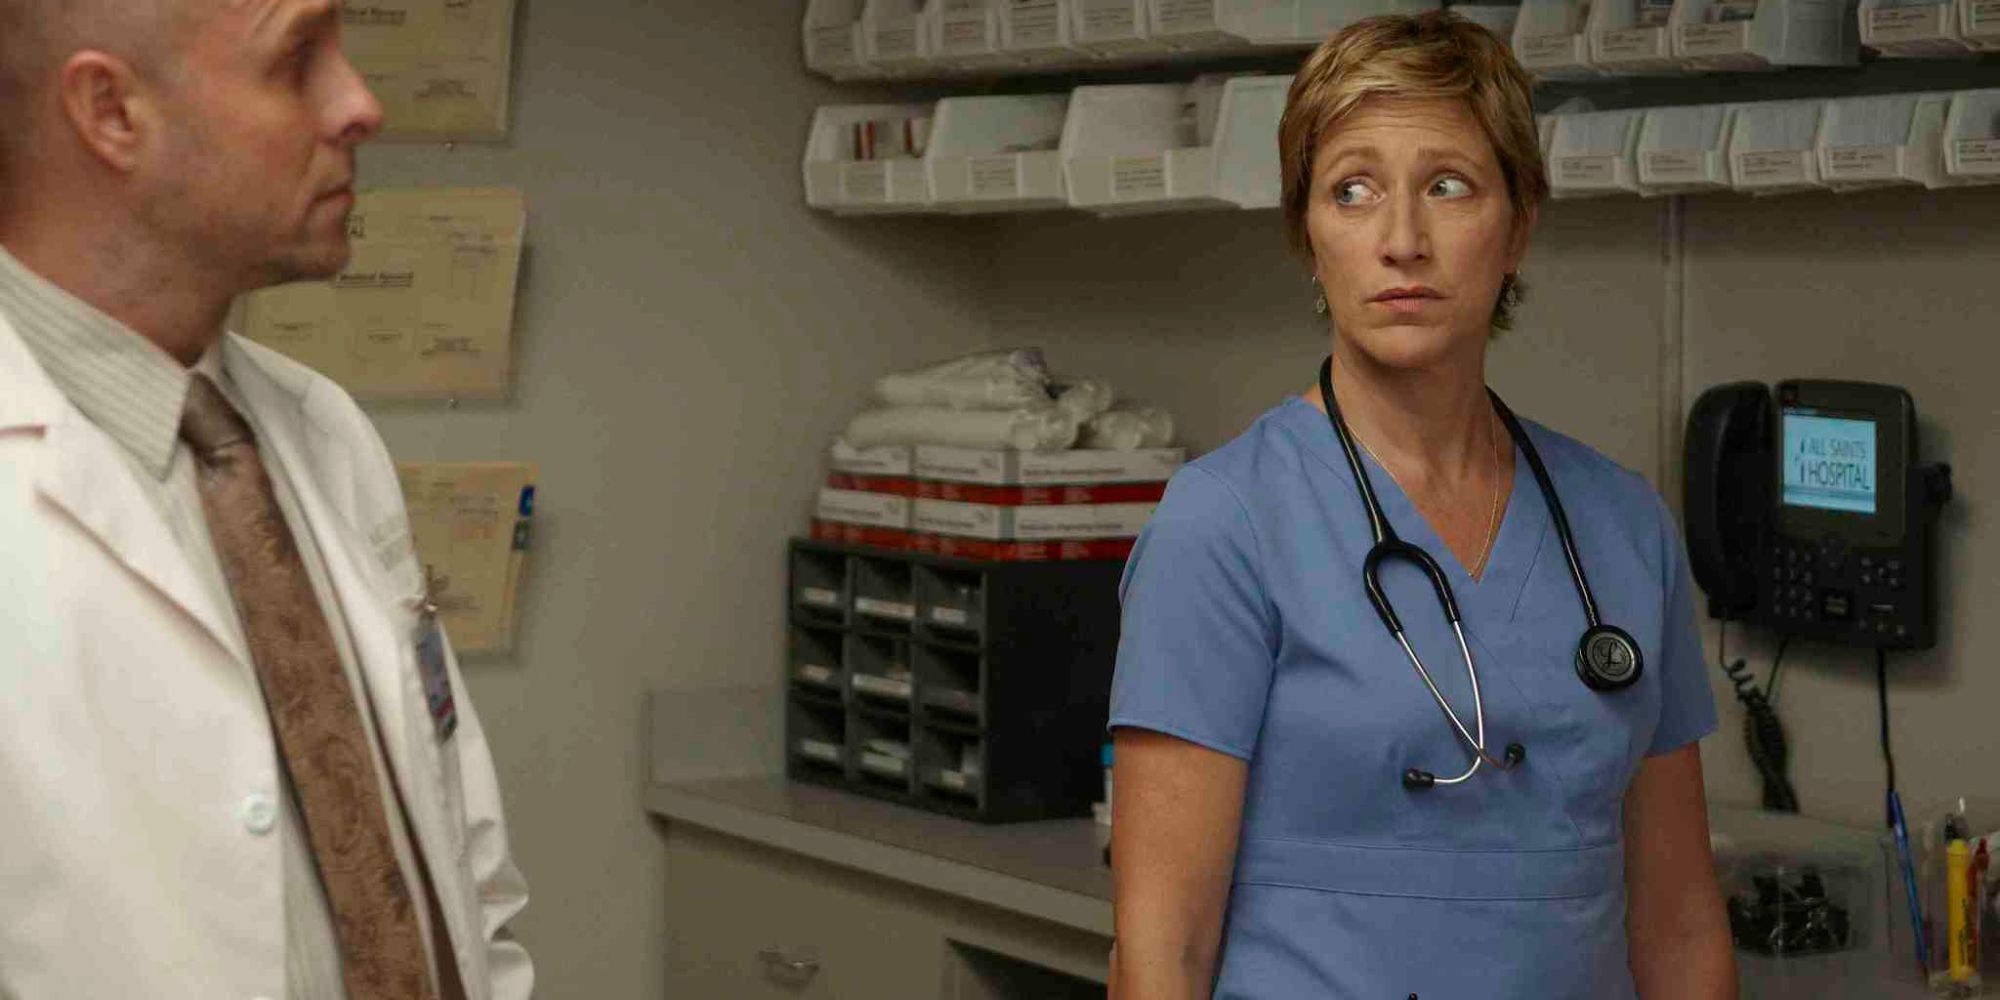 Edie Falco as Jackie and Paul Schulze as Eddie stand in the back office of the pharmacy in Nurse Jackie